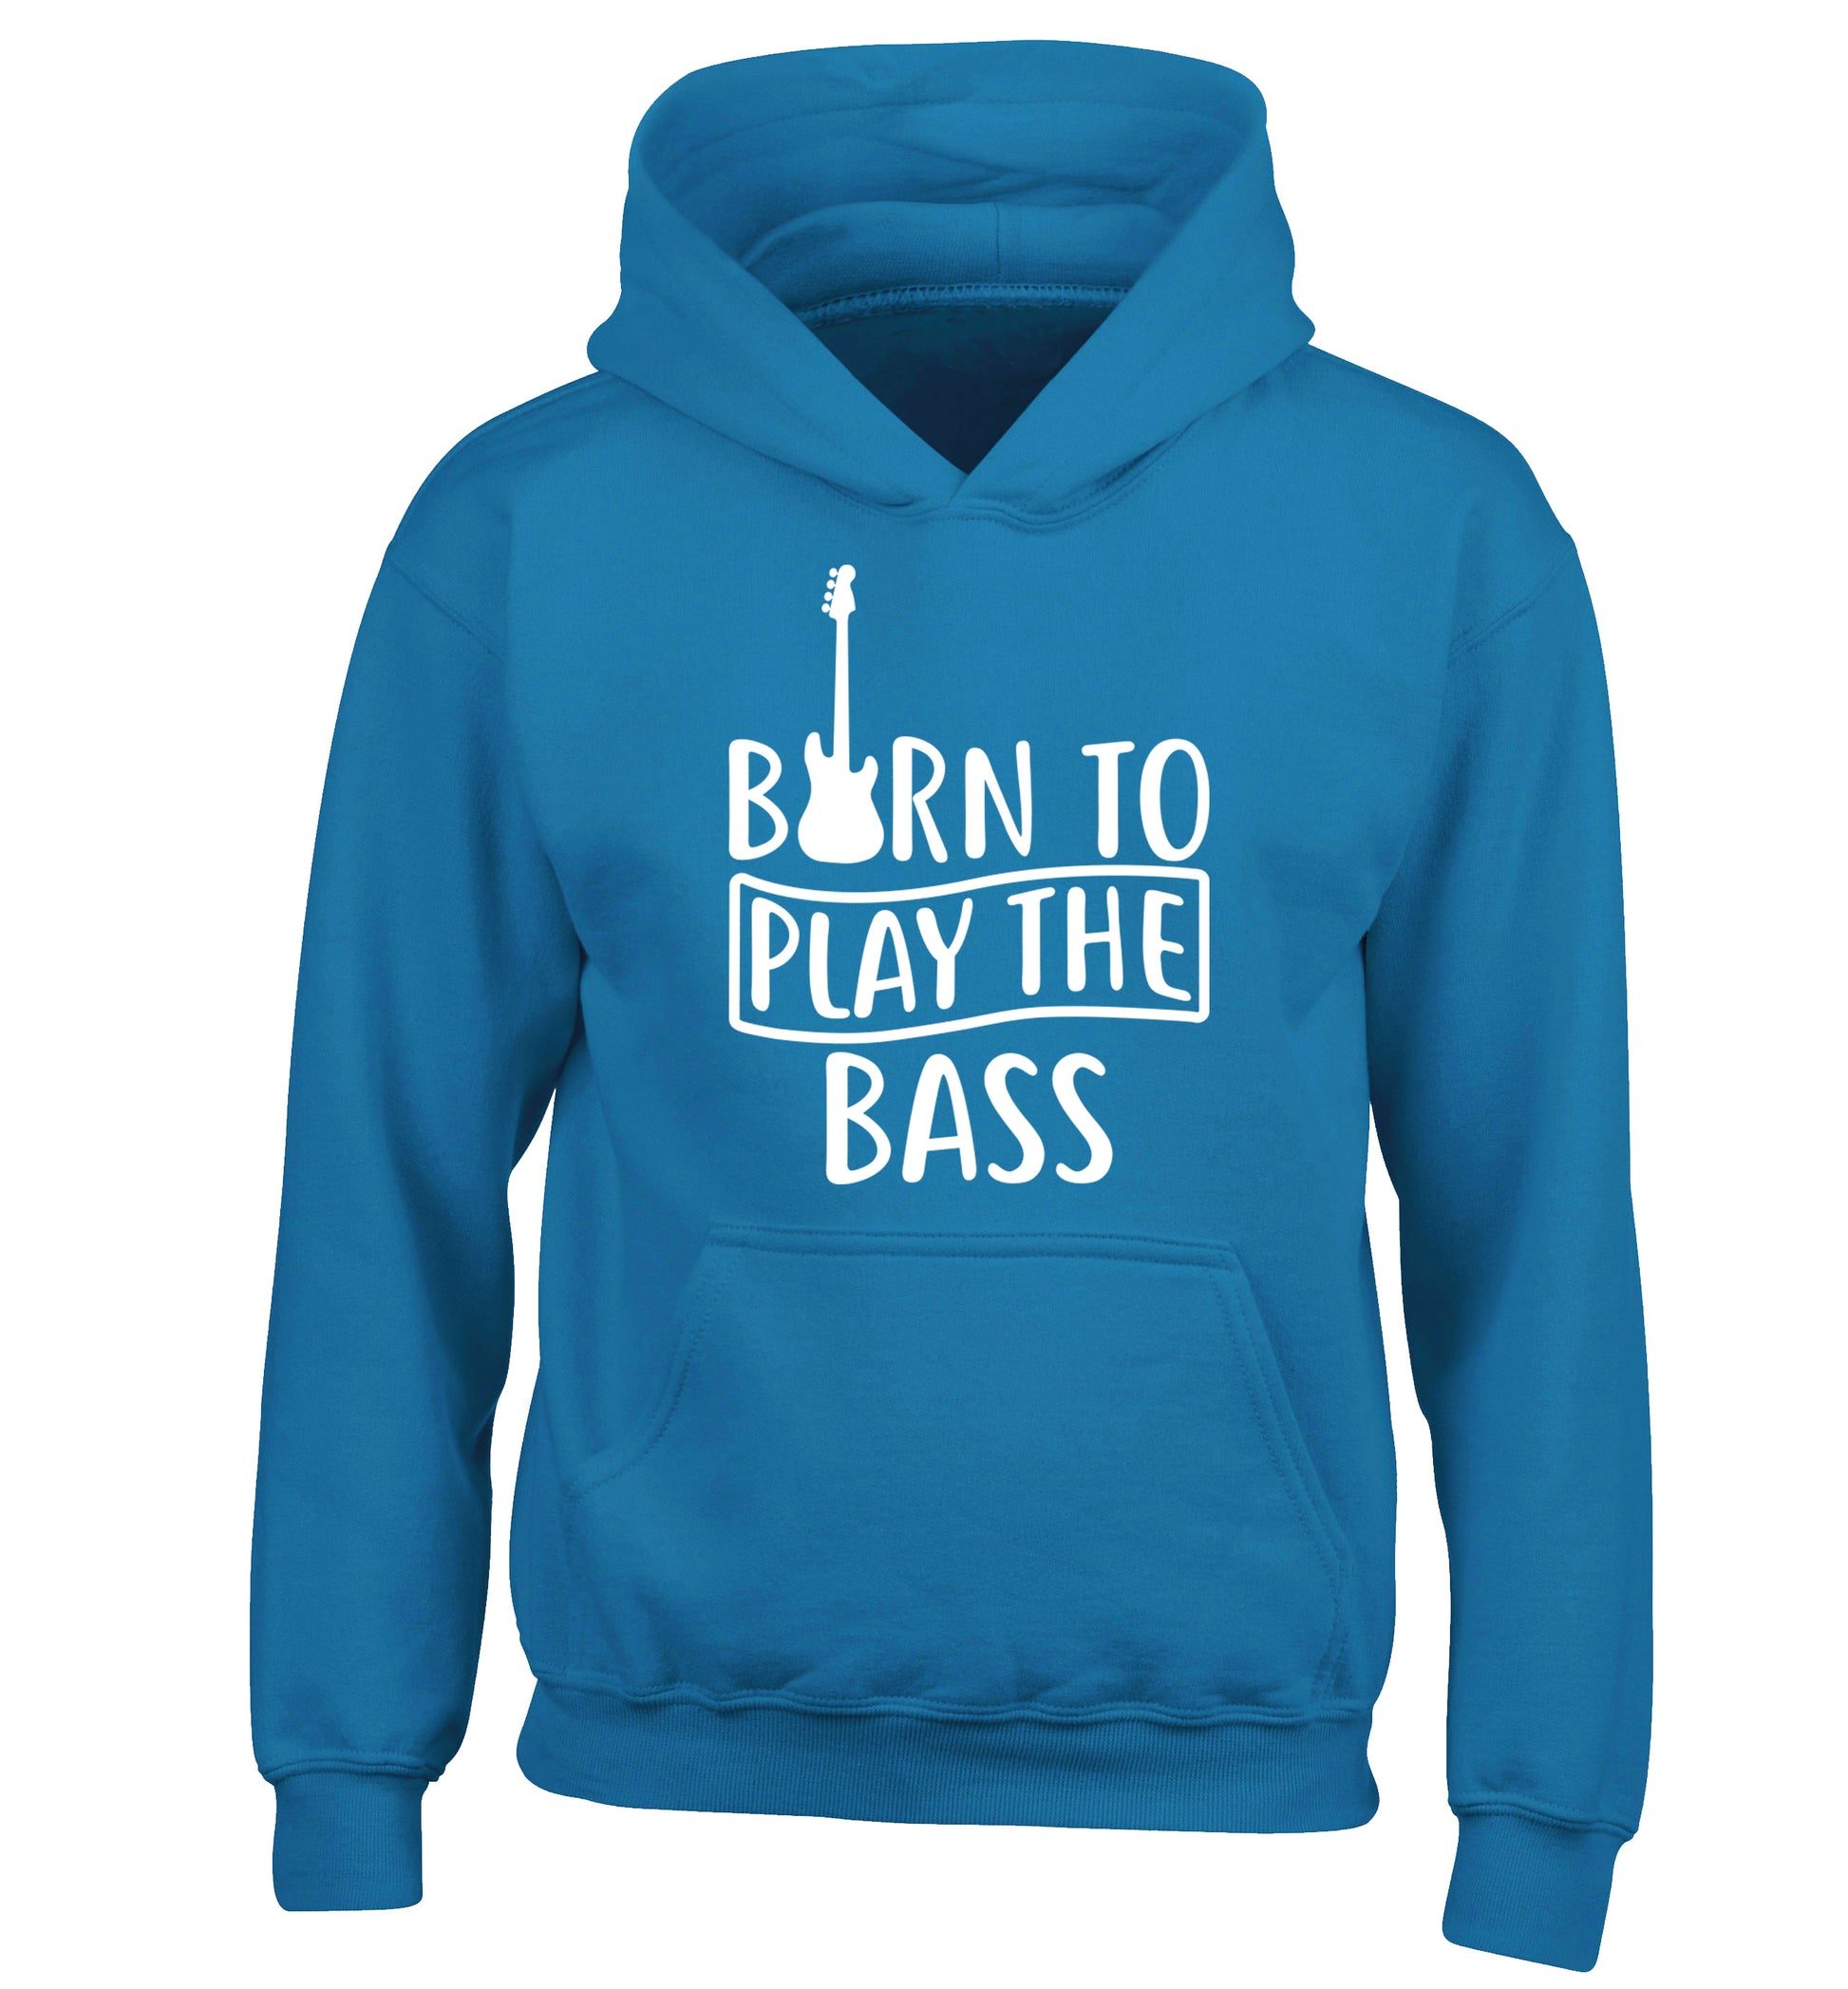 Born to play the bass children's blue hoodie 12-14 Years